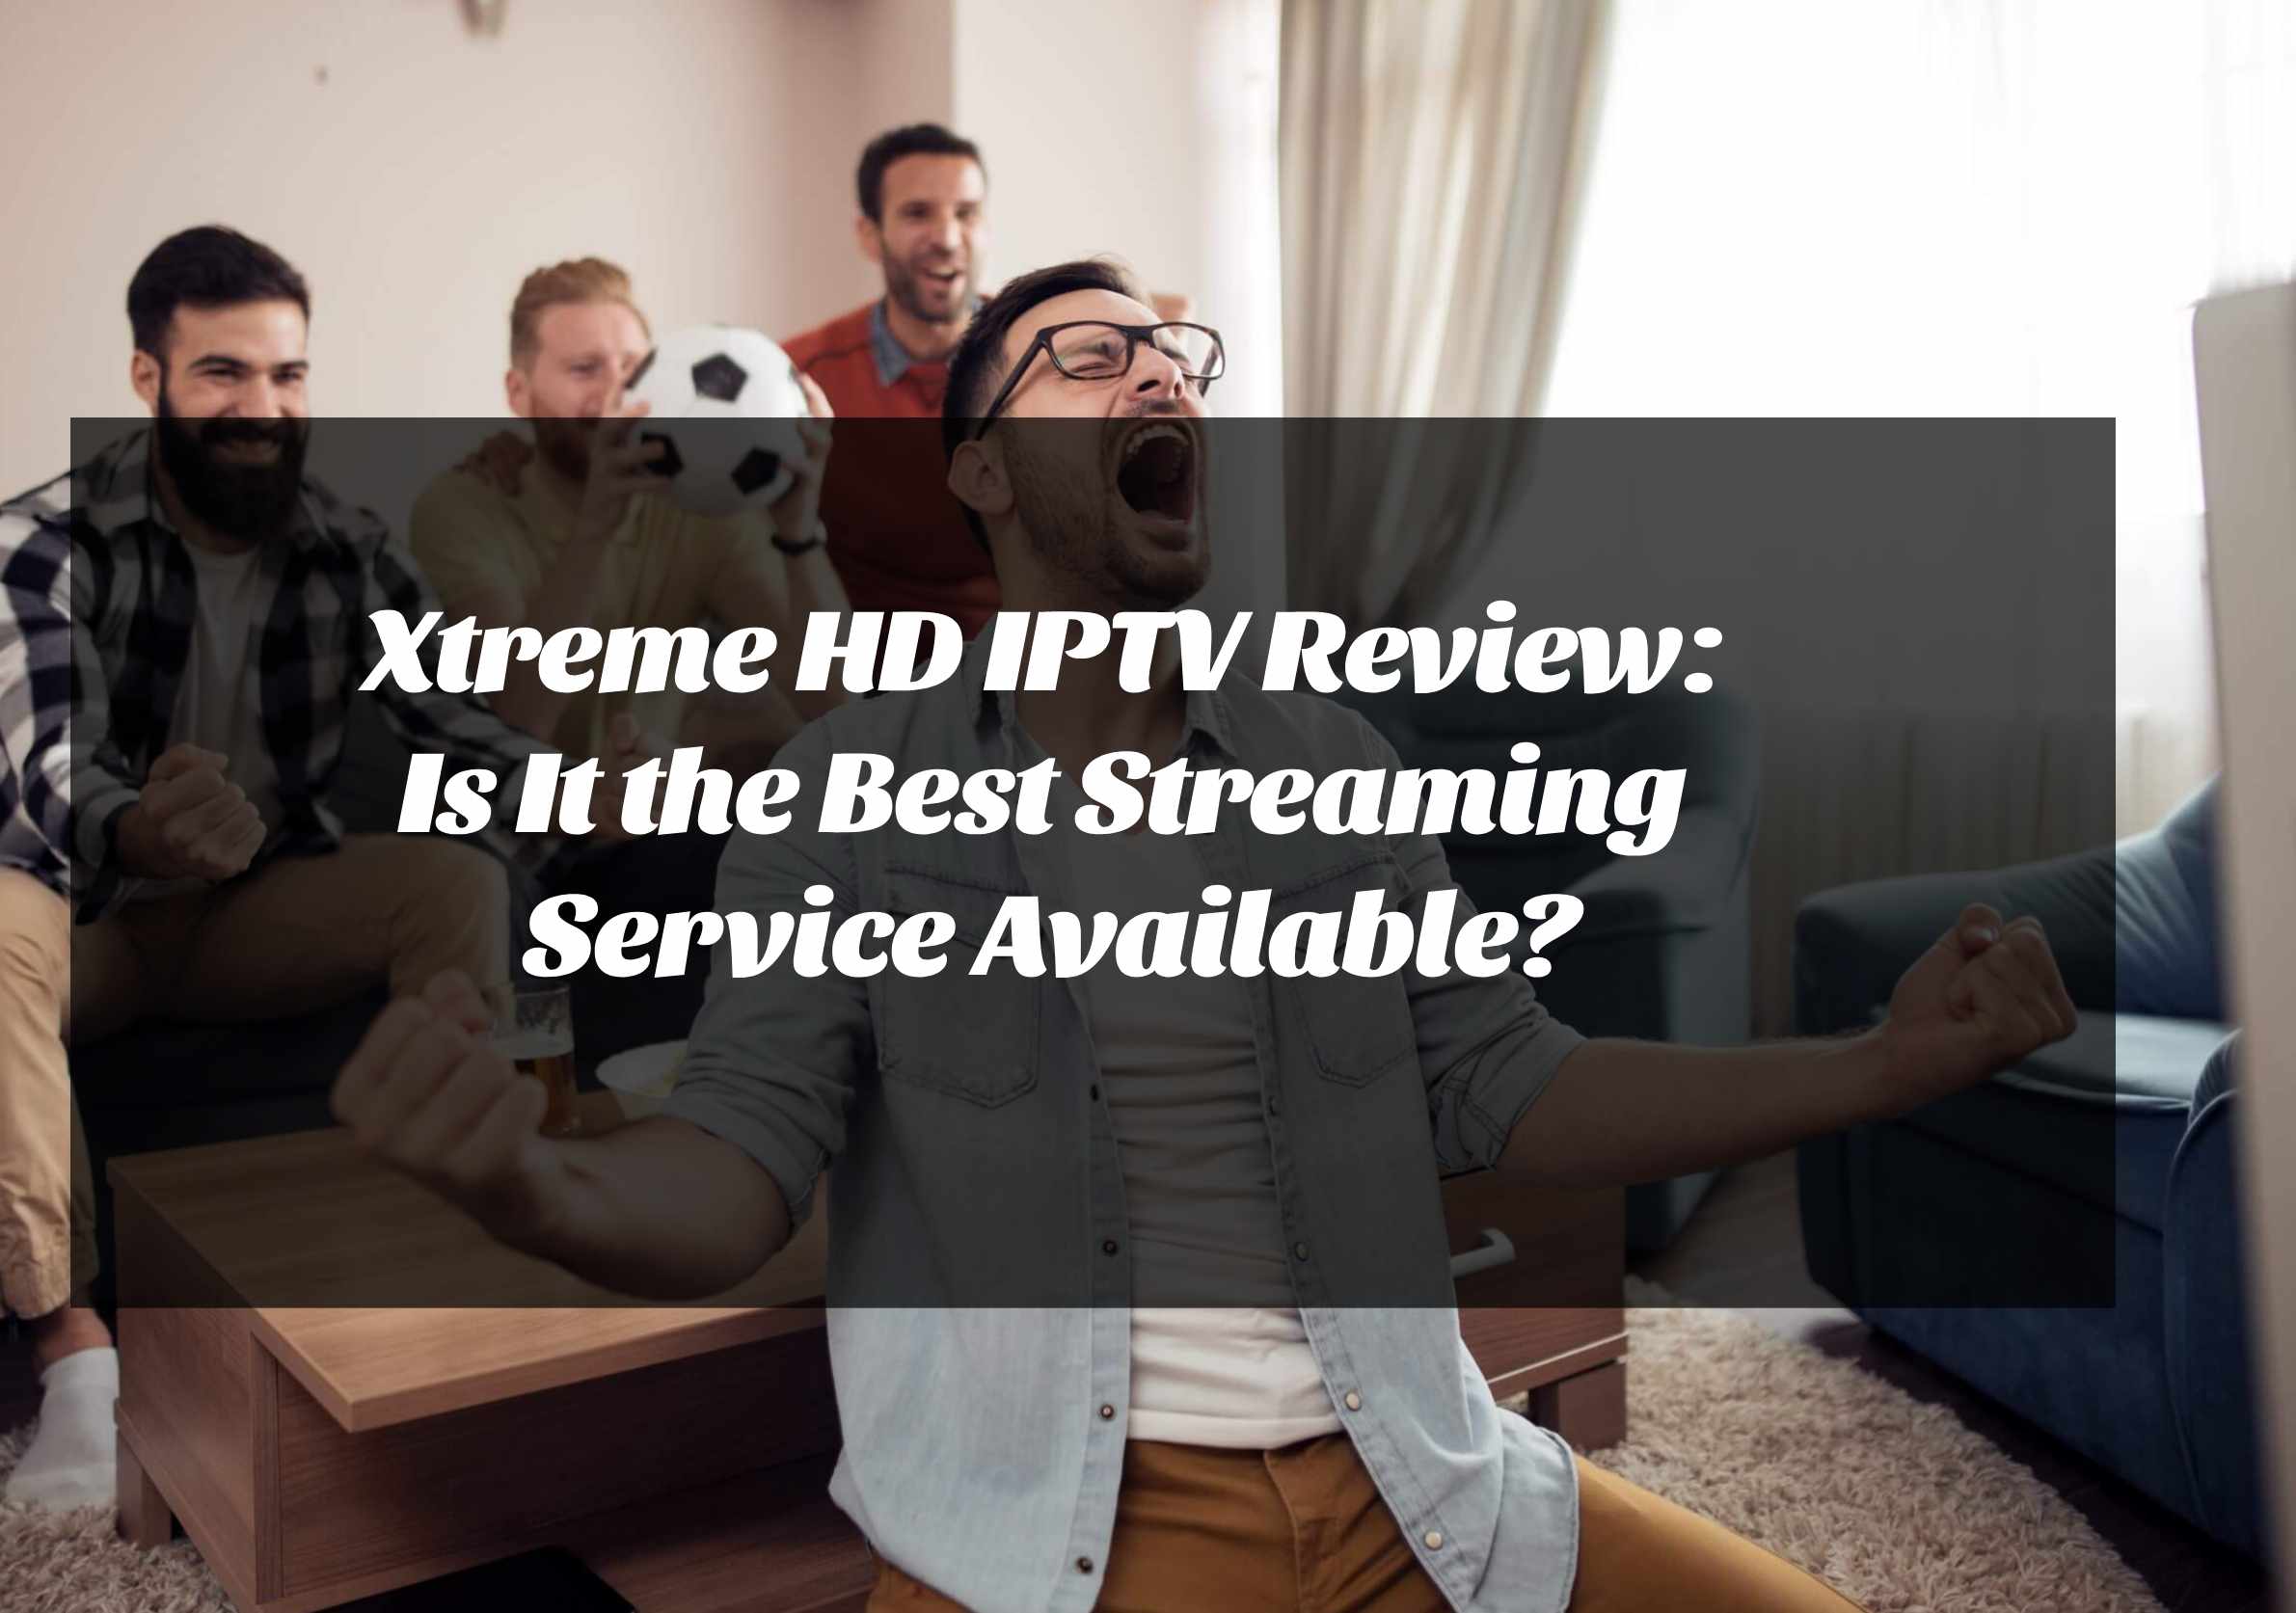 Xtreme HD IPTV Review Is It the Best Streaming Service Available